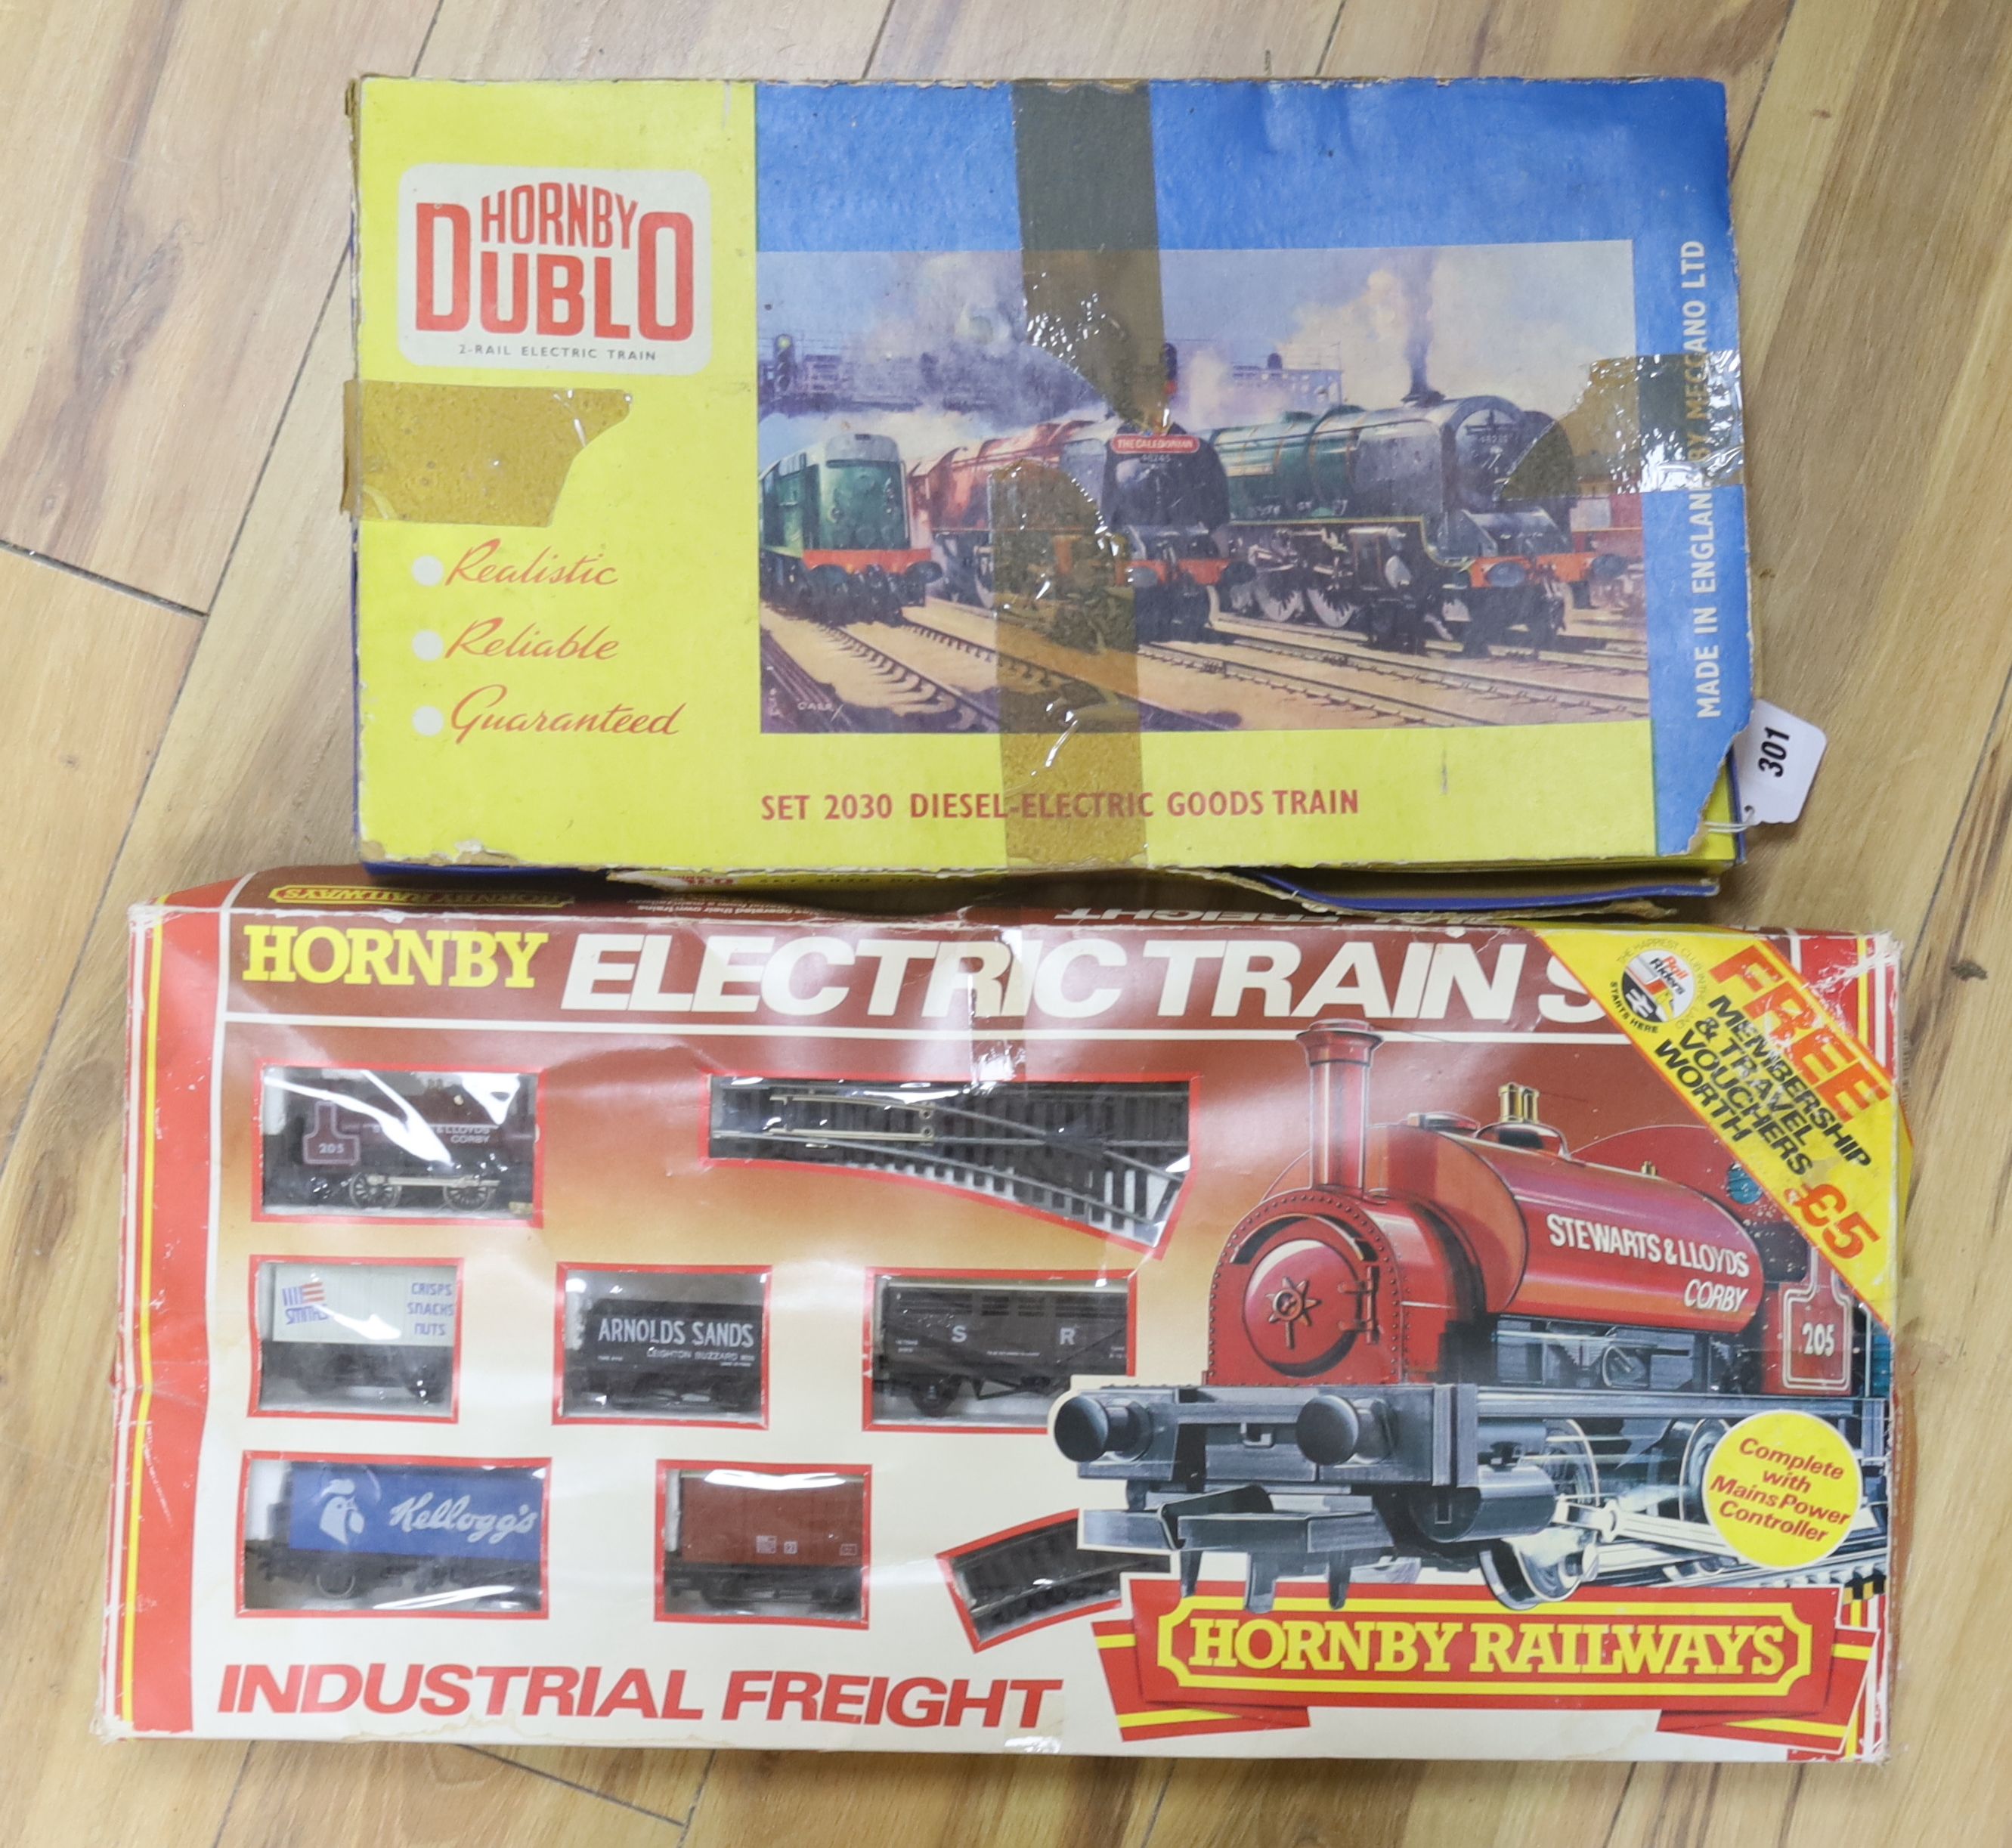 A Hornby 00 set 2030 and an Industrial freight set